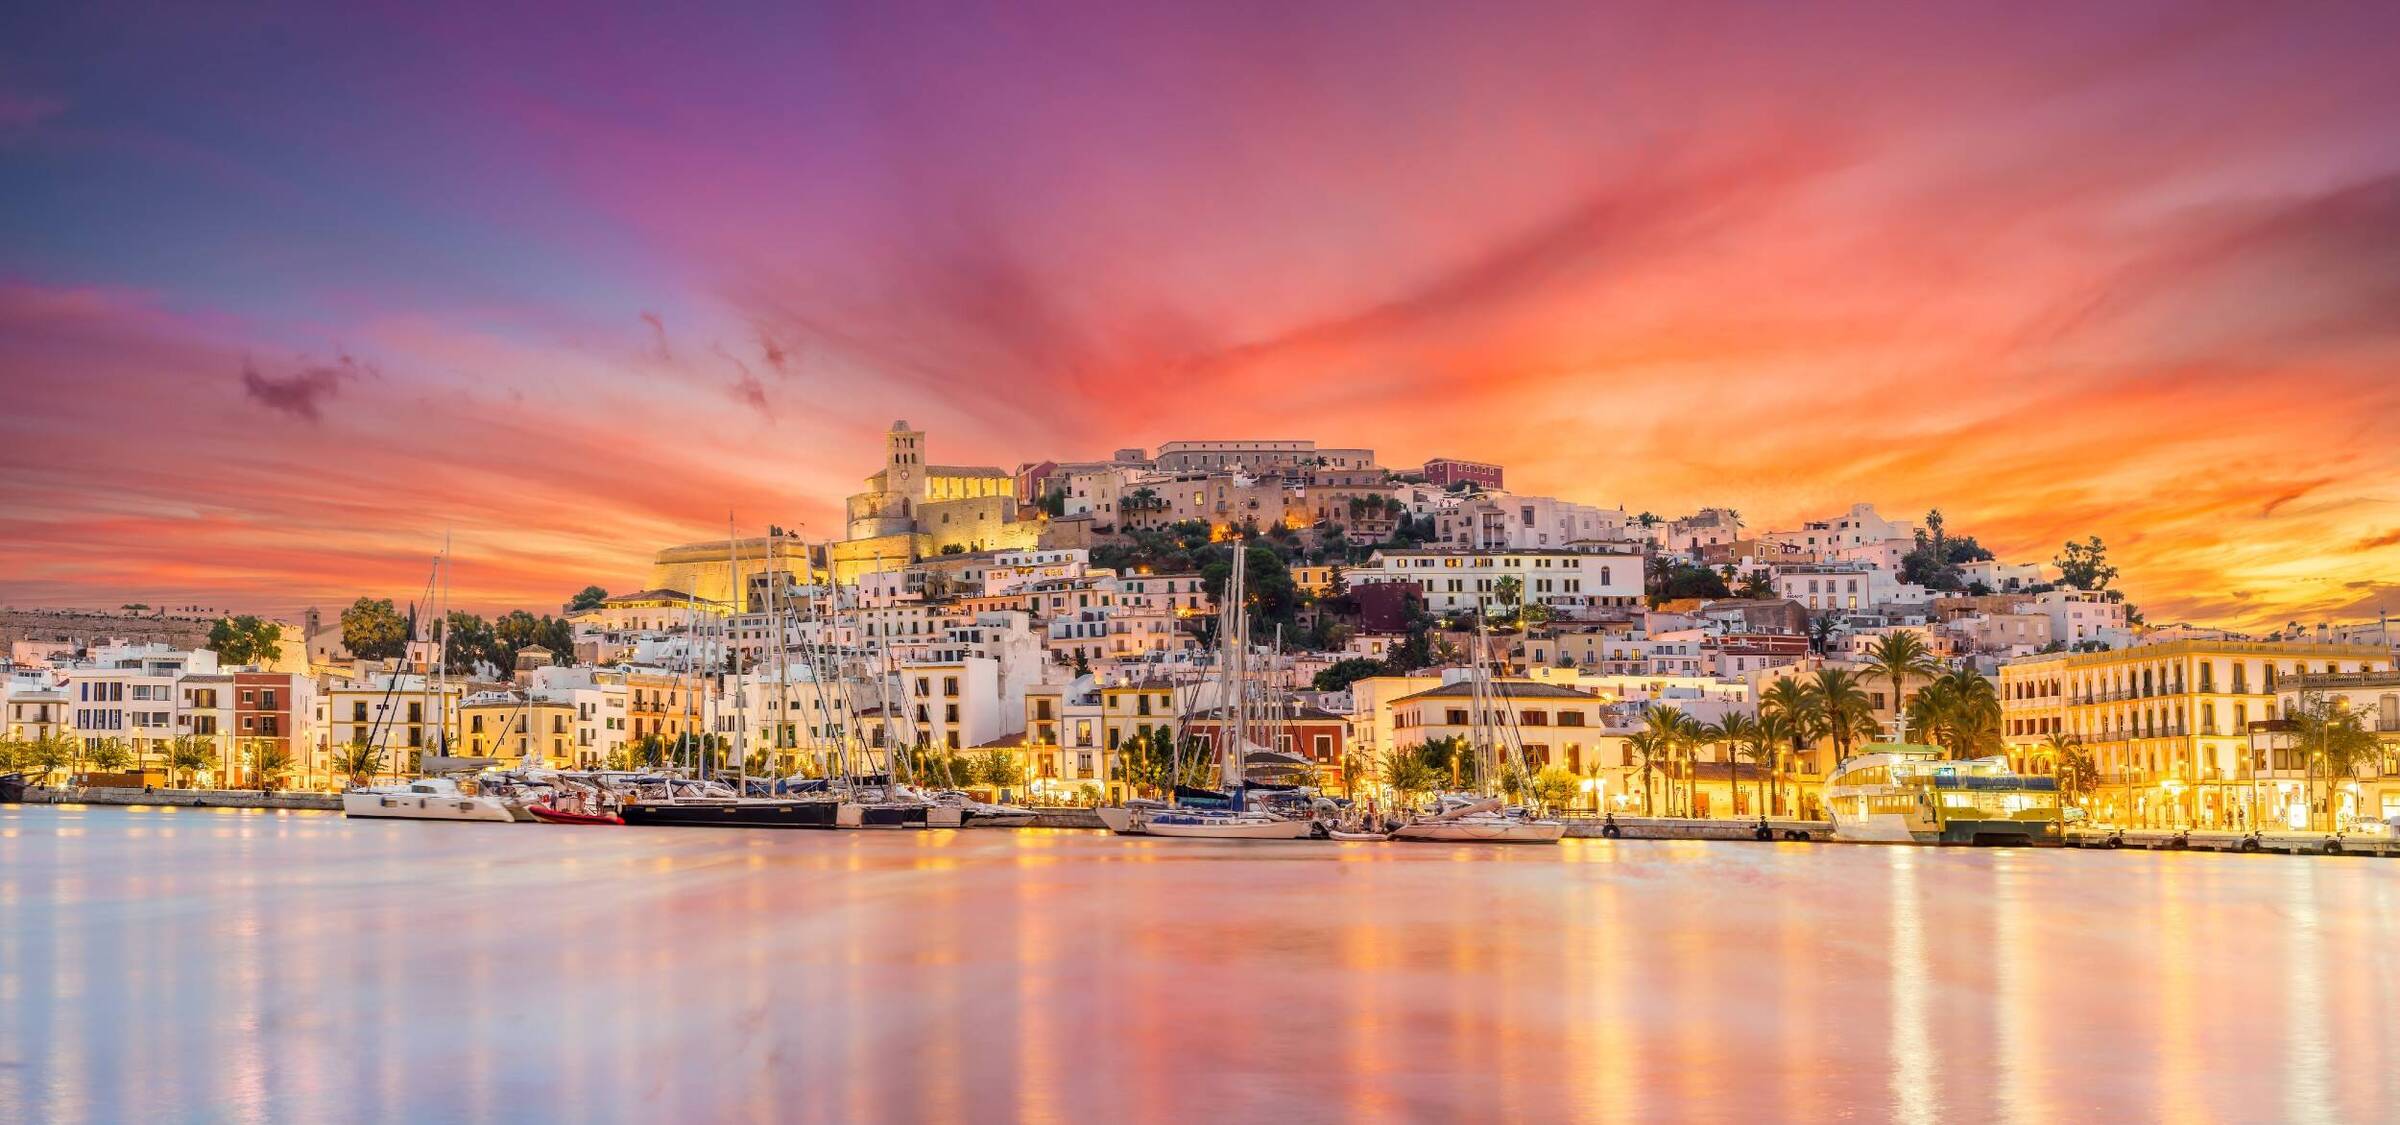 The most romantic places to visit in Ibiza